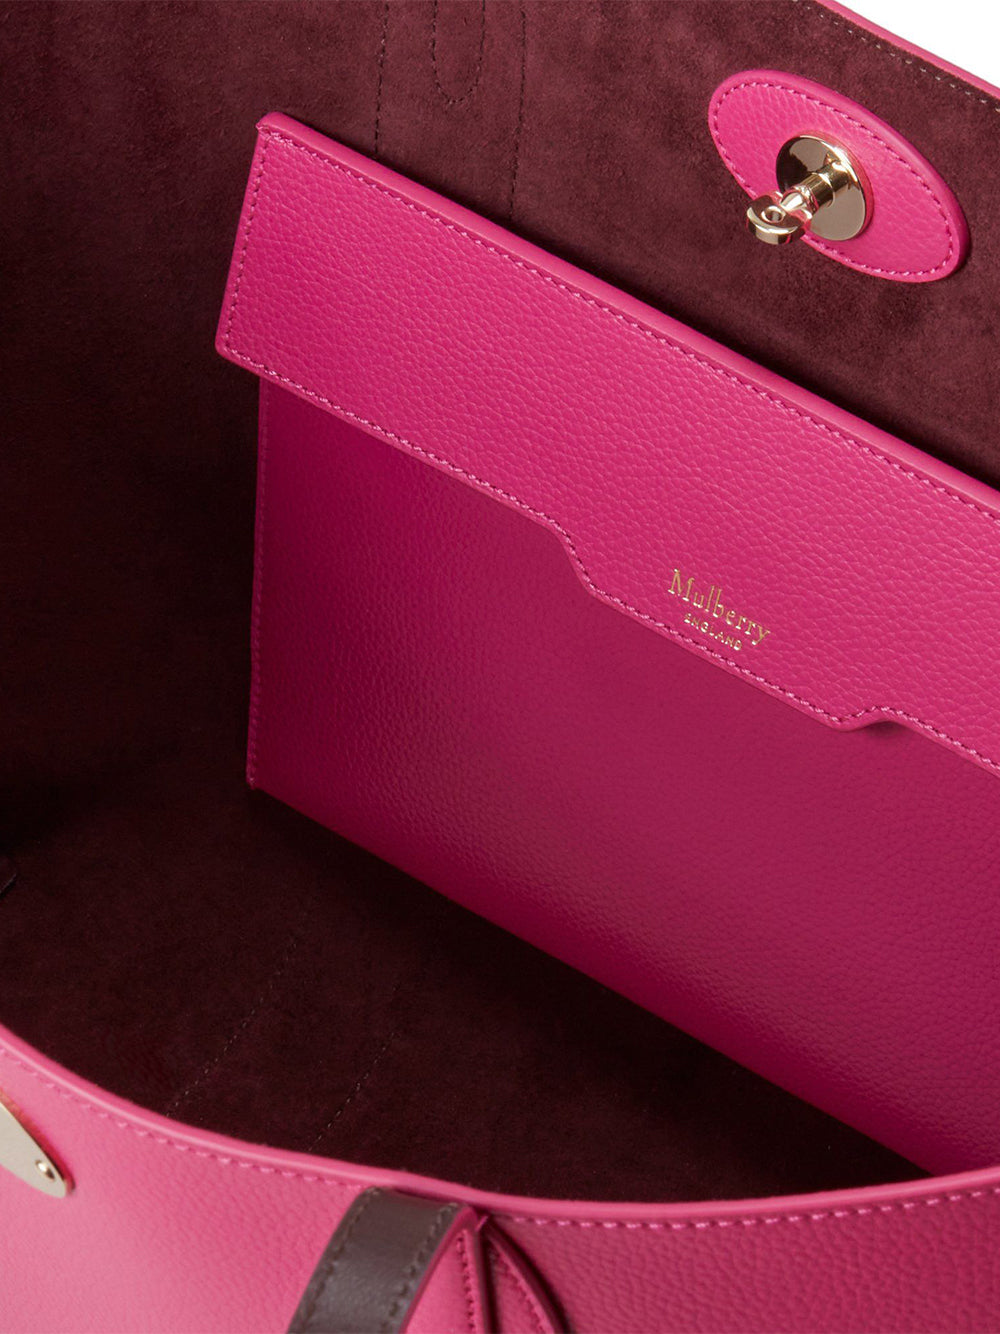 MULBERRY-Bayswater-Tote-Mulberry-Pink-Small-Classic-Grain-4